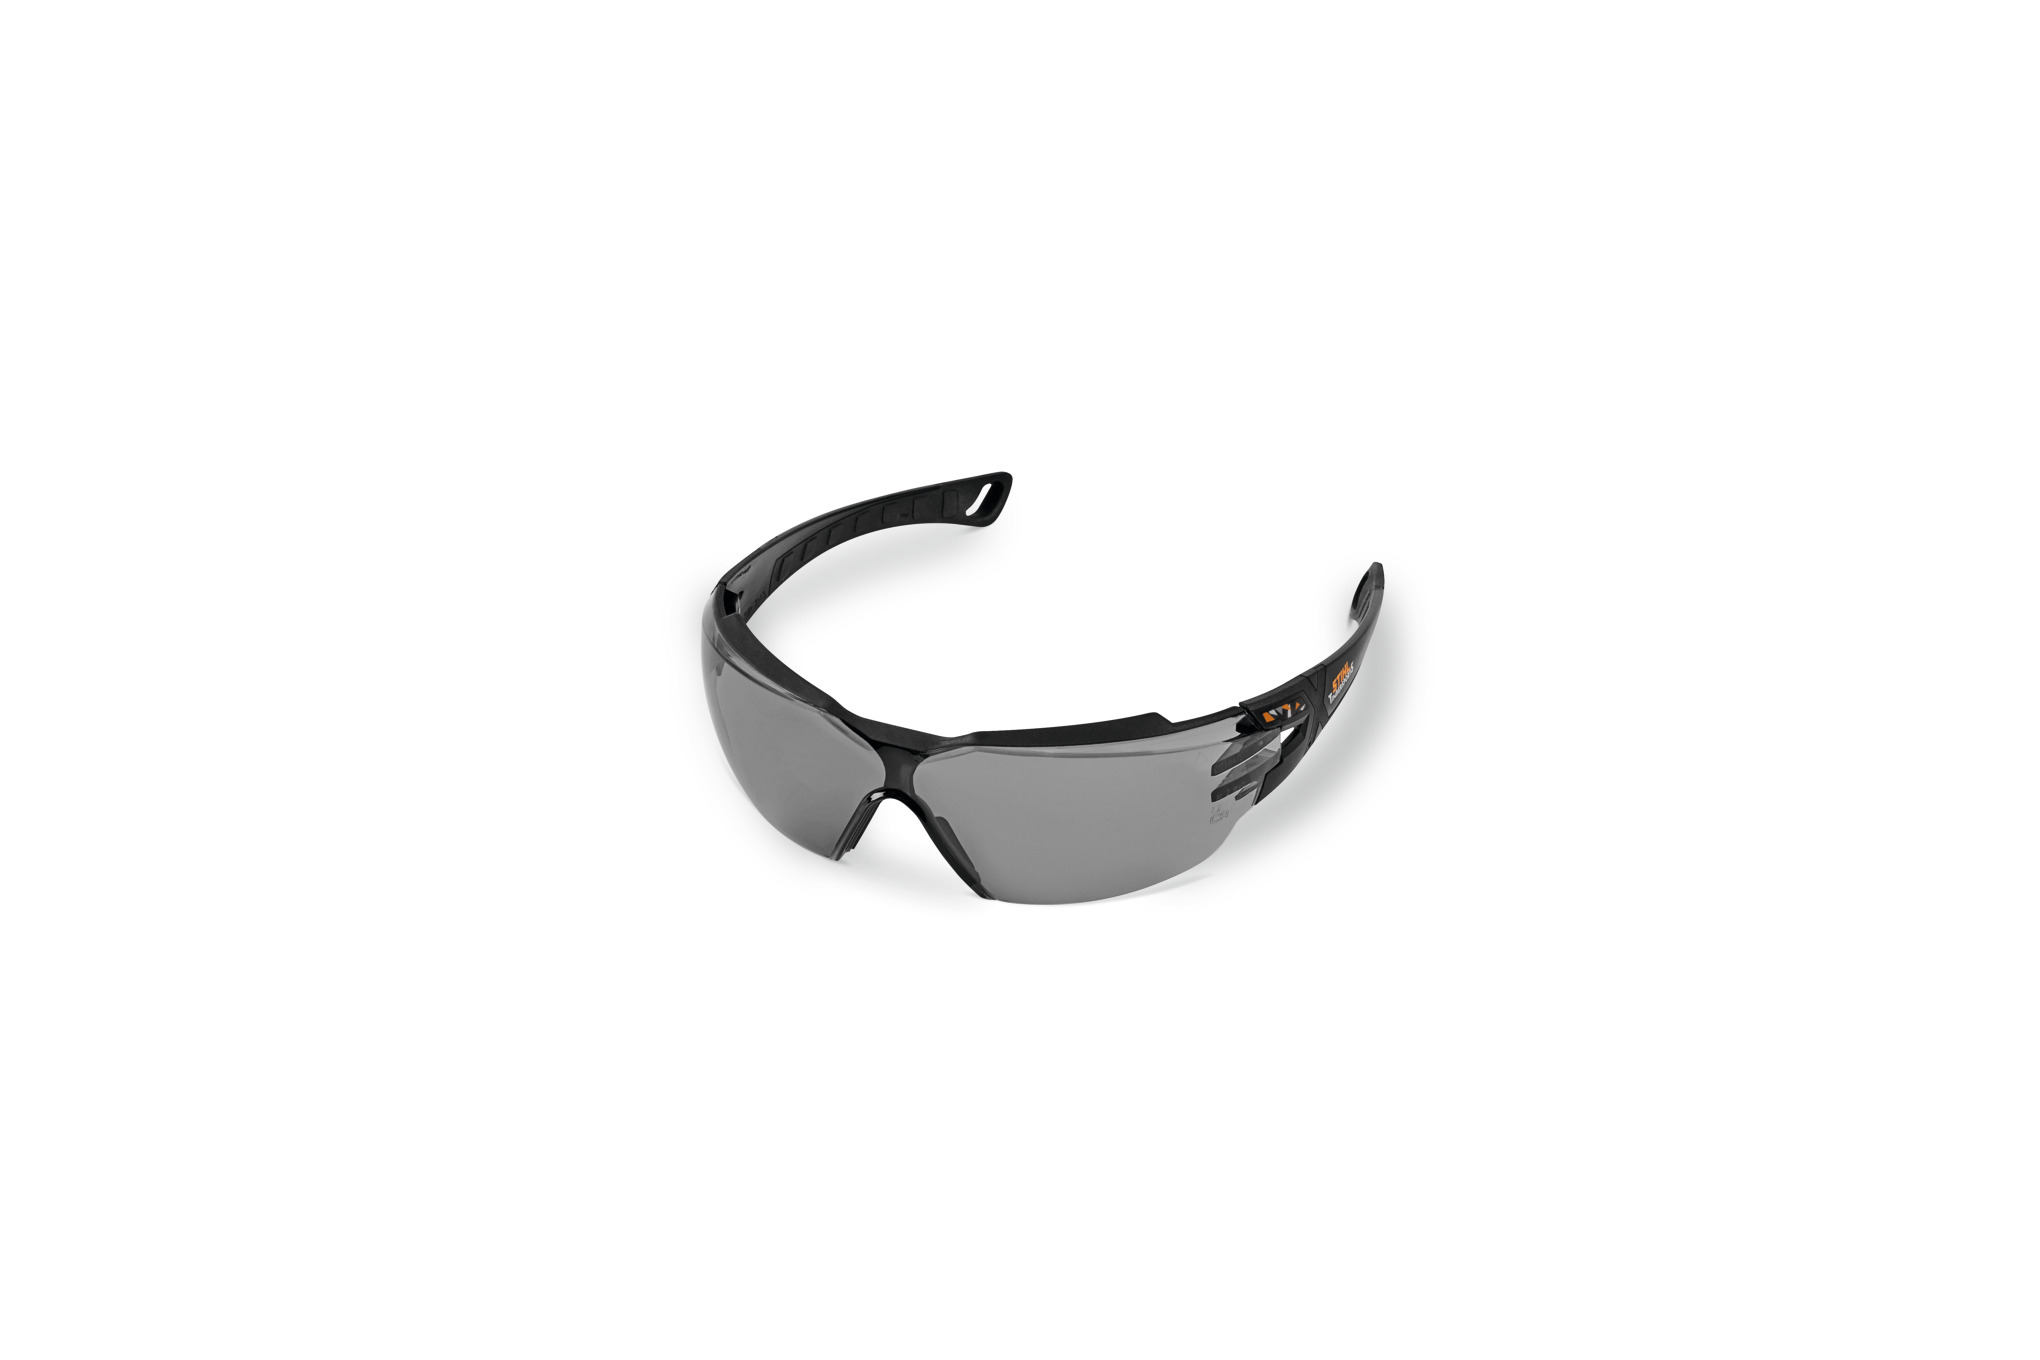 Lunettes de protection TIMBERSPORTS® Edition, teintées